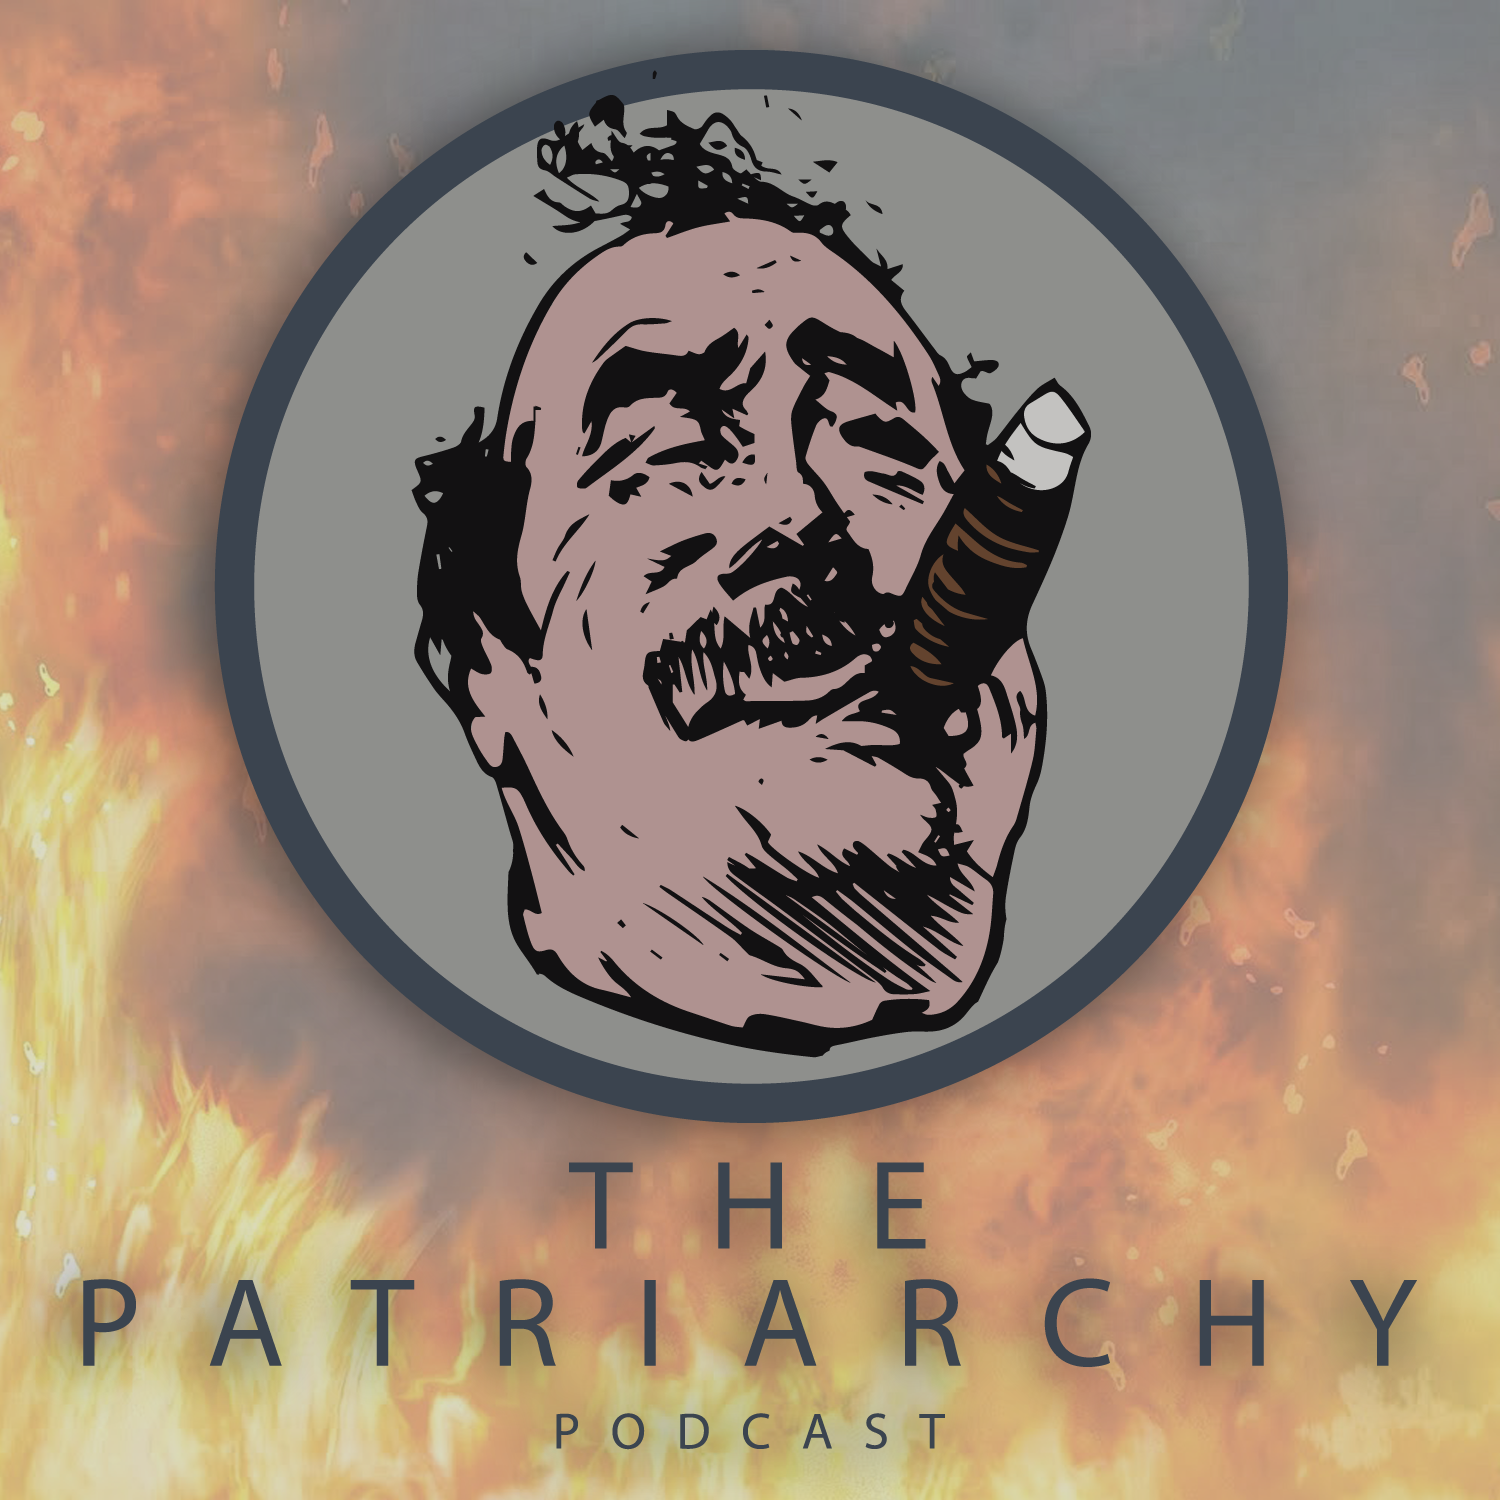 The Patriarchy Podcast: Risky Business (Ep 35)